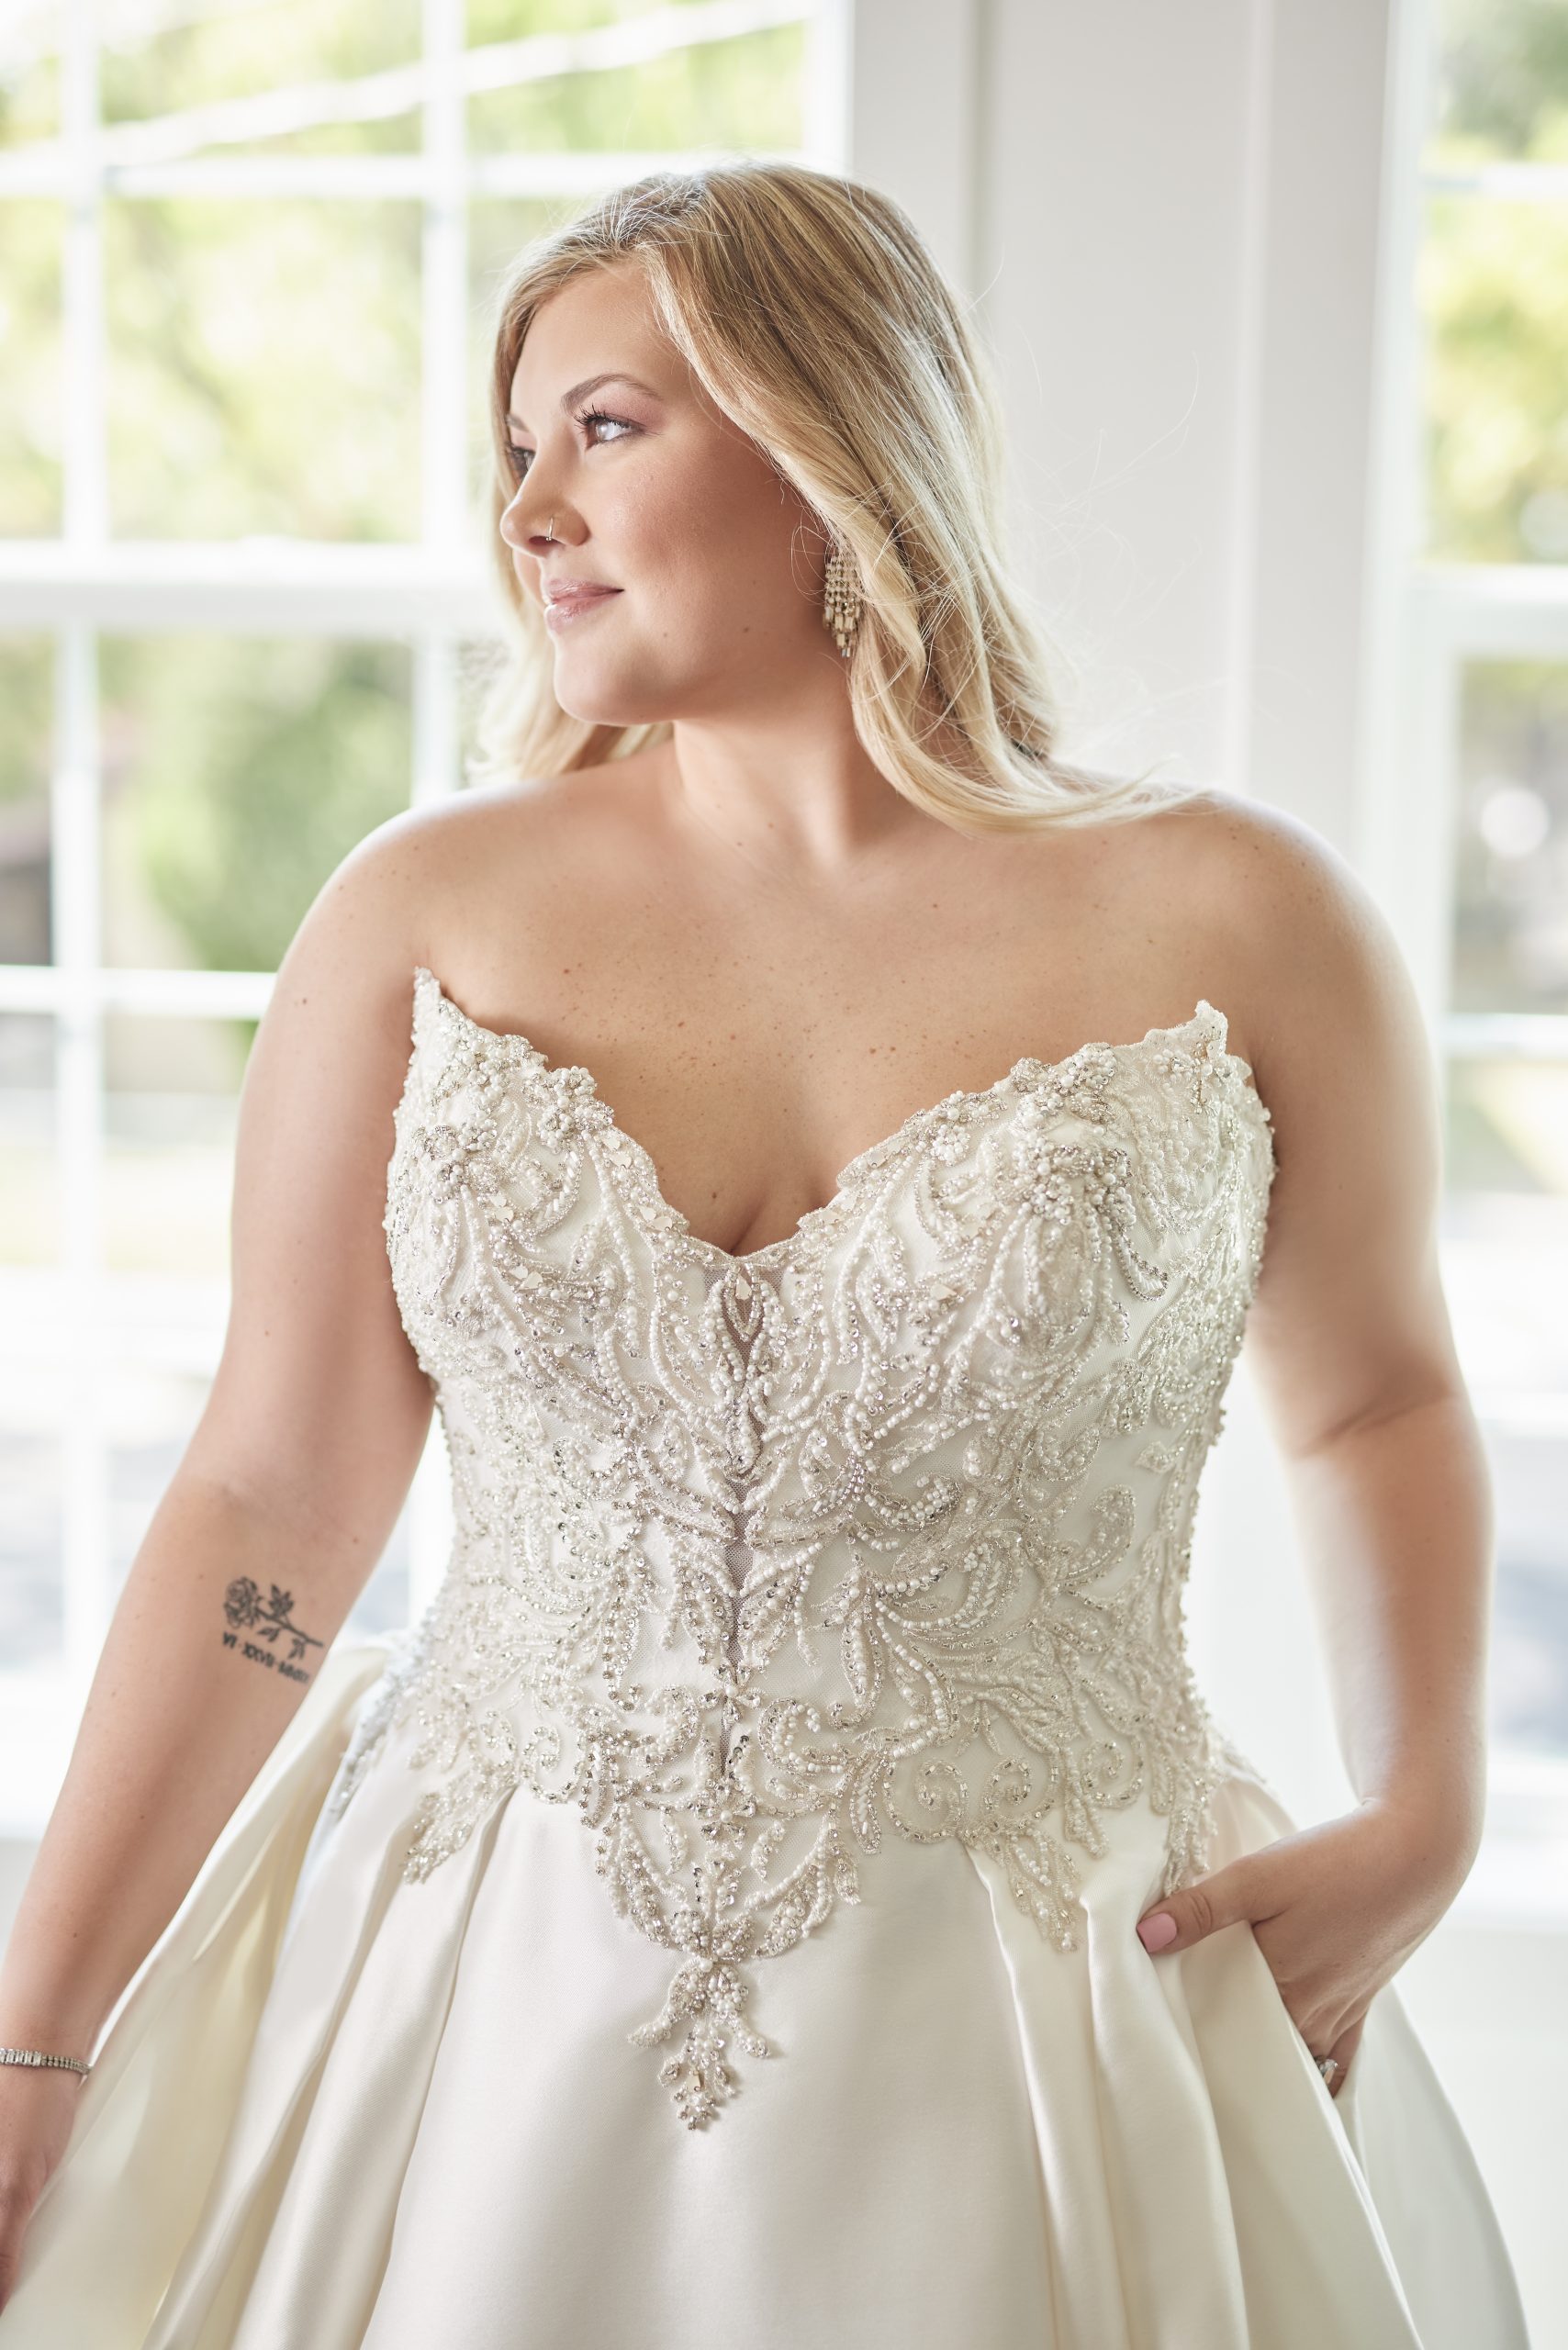 Plus Size Bride Wearing A Classic Wedding That Is A Ball Gown Called Kimora By Sottero And Midgley